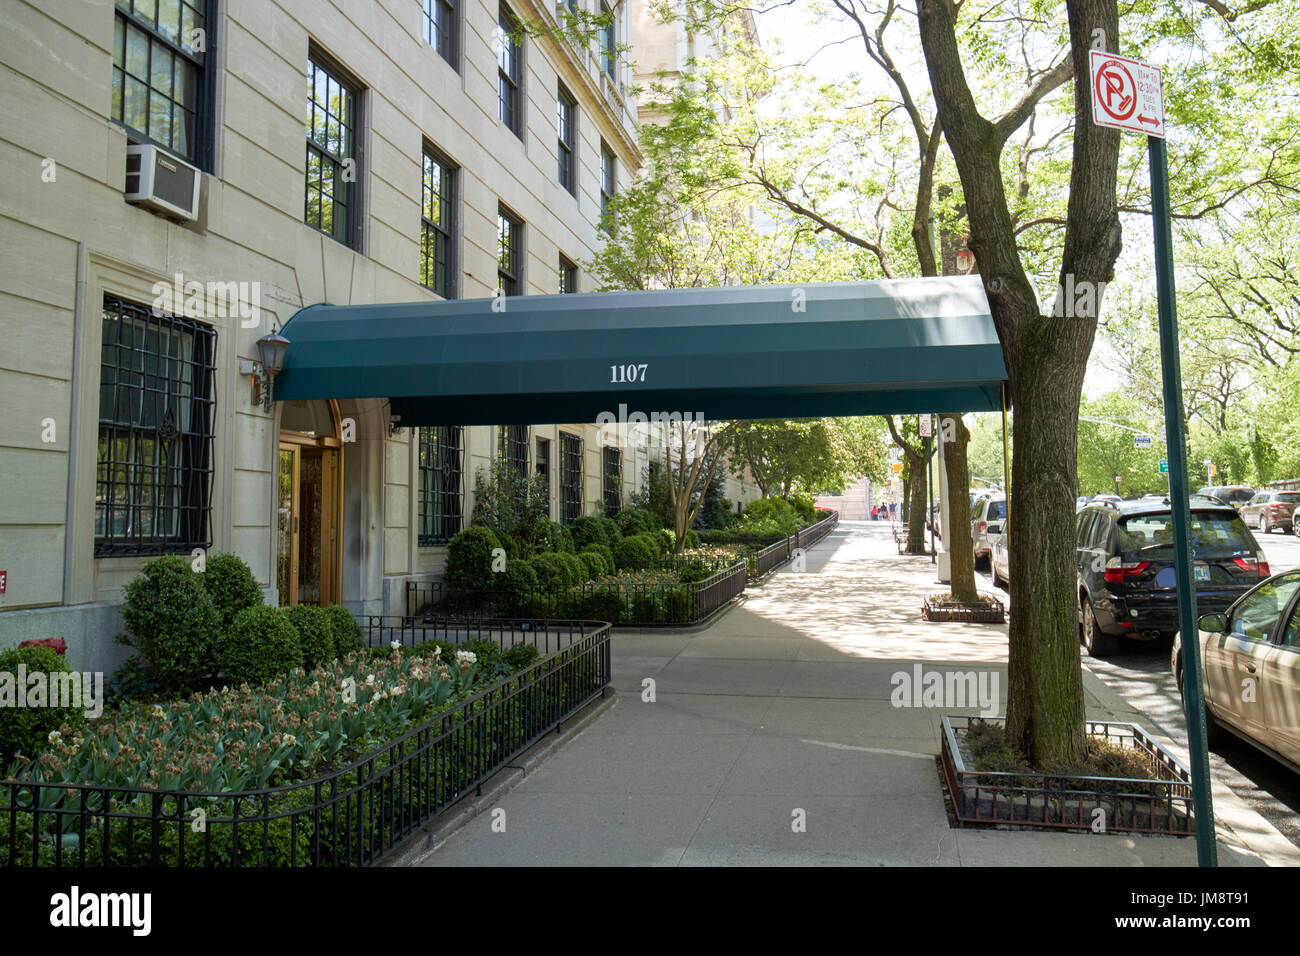 sidewalk canopy outside expensive luxury apartment building 1107 5th avenue upper east side New York City USA Stock Photo